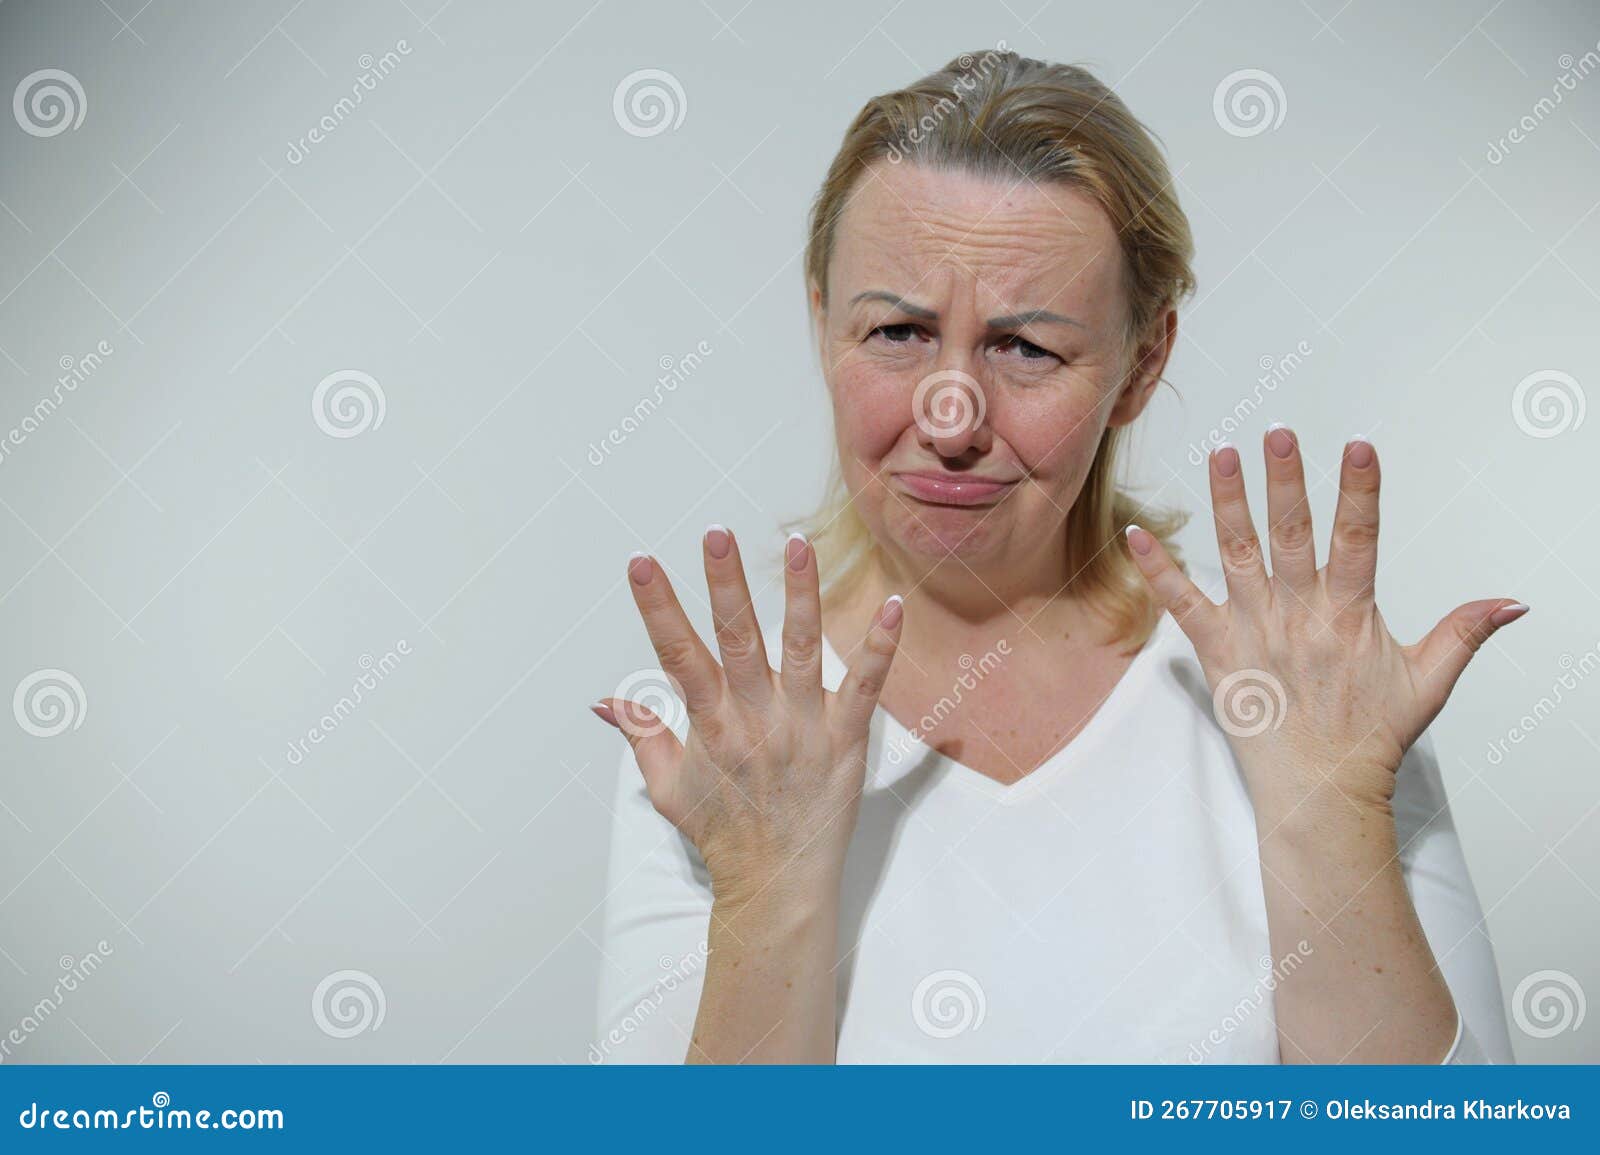 adult woman is offended upset like child she put out fingers with fan of both hands looks into frame completely frowning